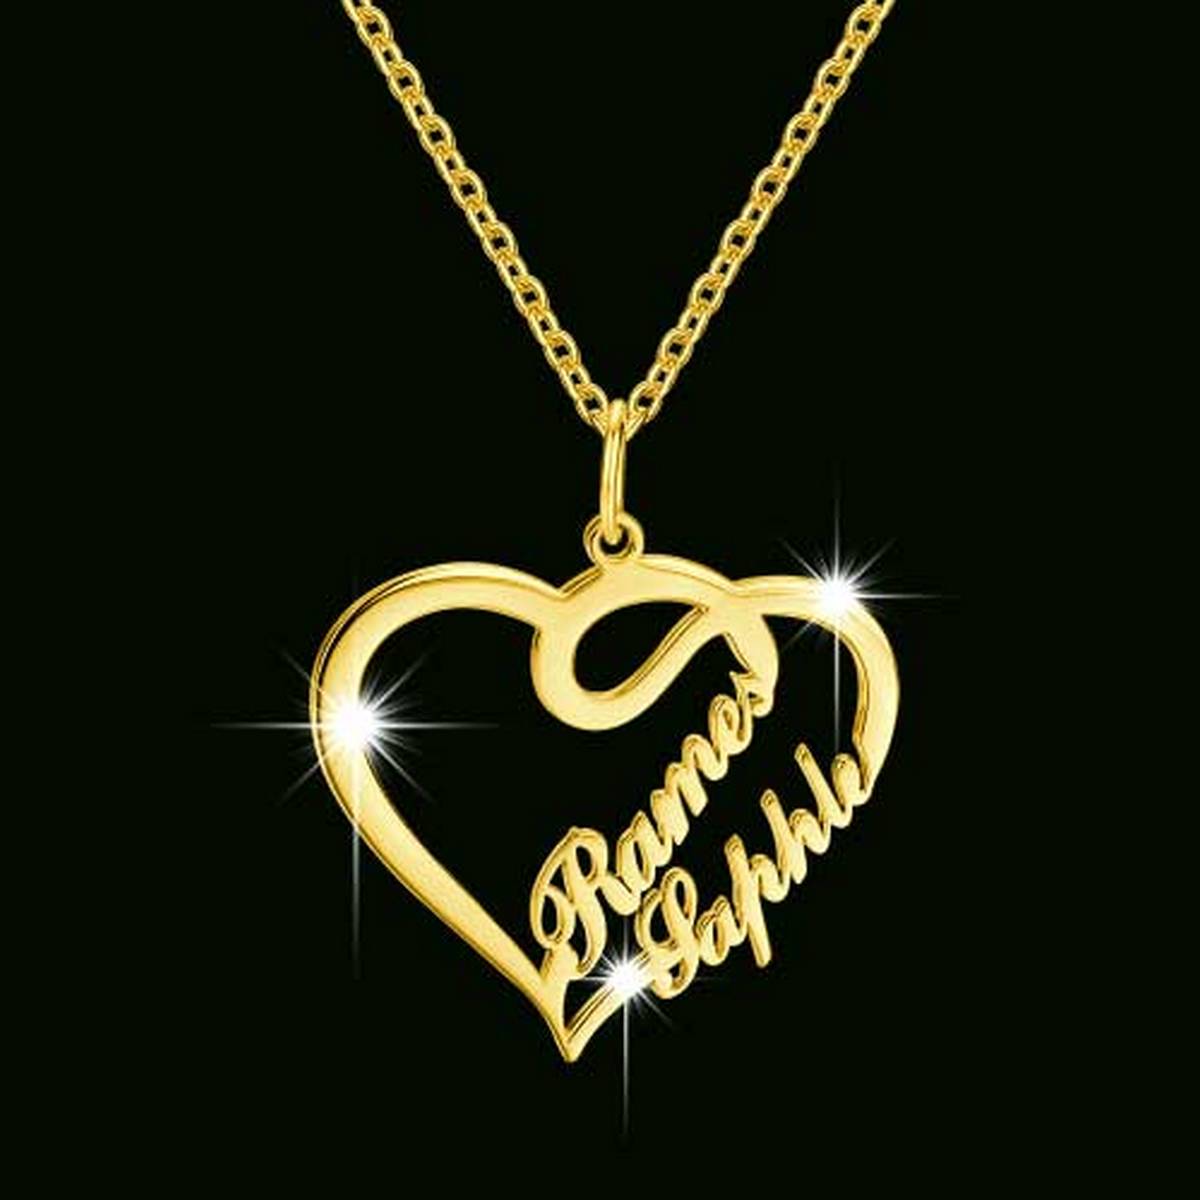 Love Heart Design Gold Plated Double Name Locket Get Any Personalized Name Necklace For Gift Item Buy Online At Best Prices In Pakistan Daraz Pk